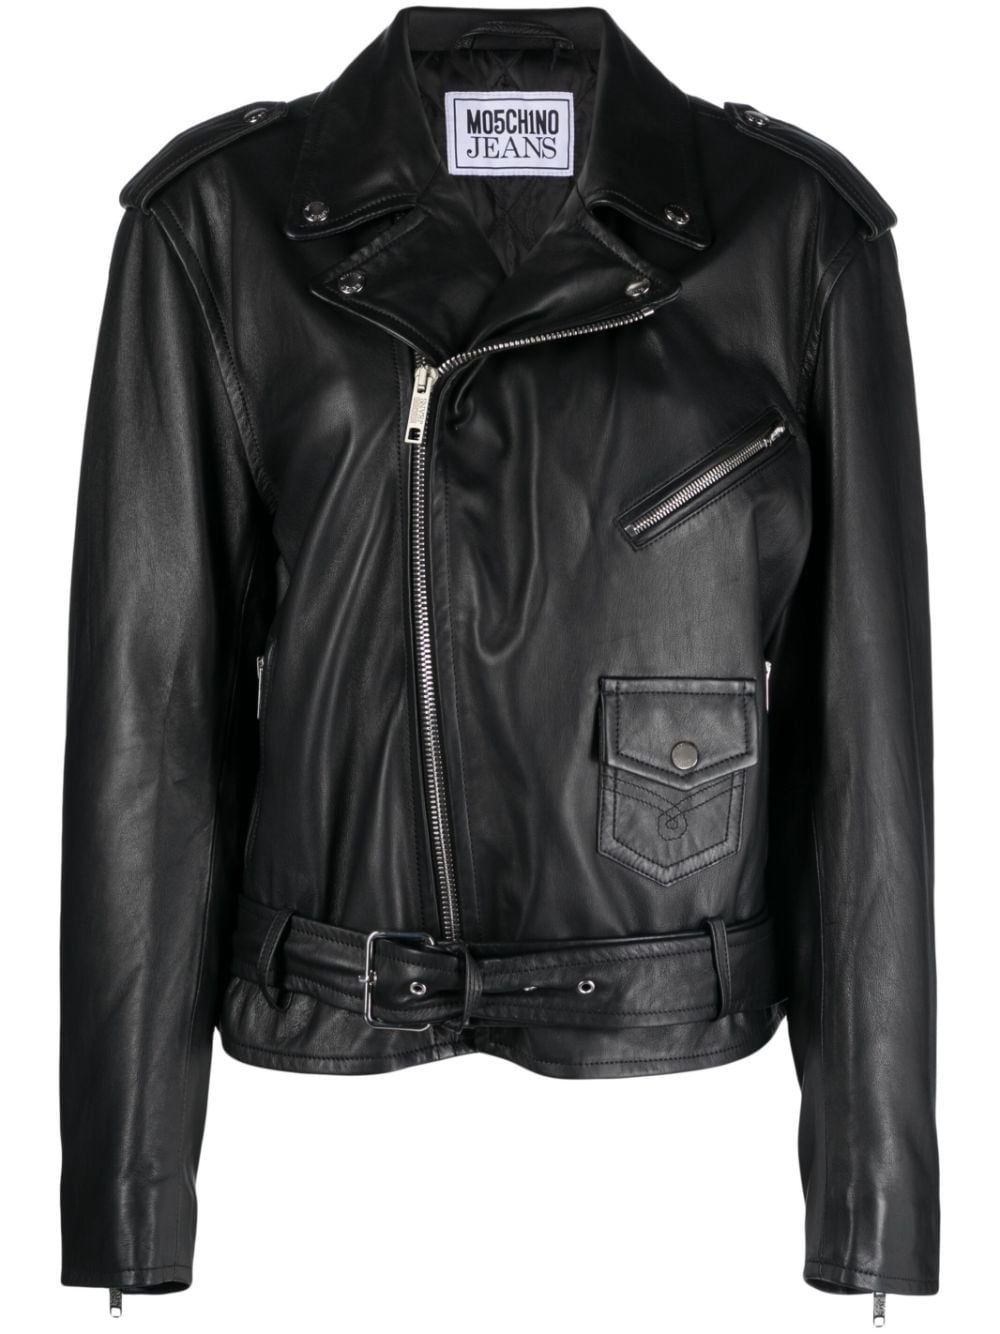 MOSCHINO JEANS peace-sign leather biker jacket - Black von MOSCHINO JEANS